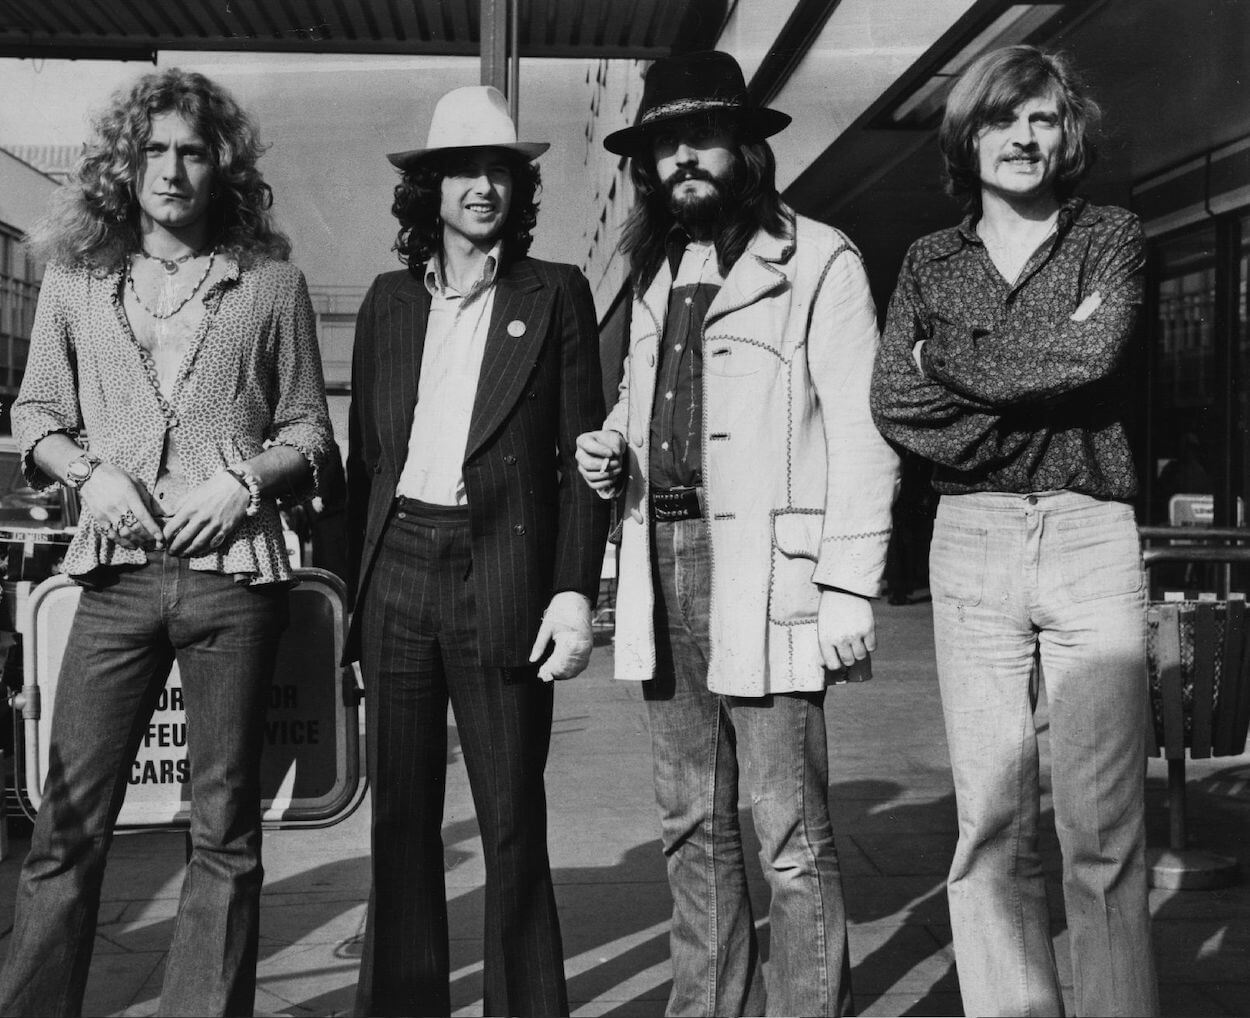 Led Zeppelin members (from left) Robert Plant, Jimmy Page, John Bonham, and John Paul Jones in 1973 while touring behind 'Houses of the Holy.'